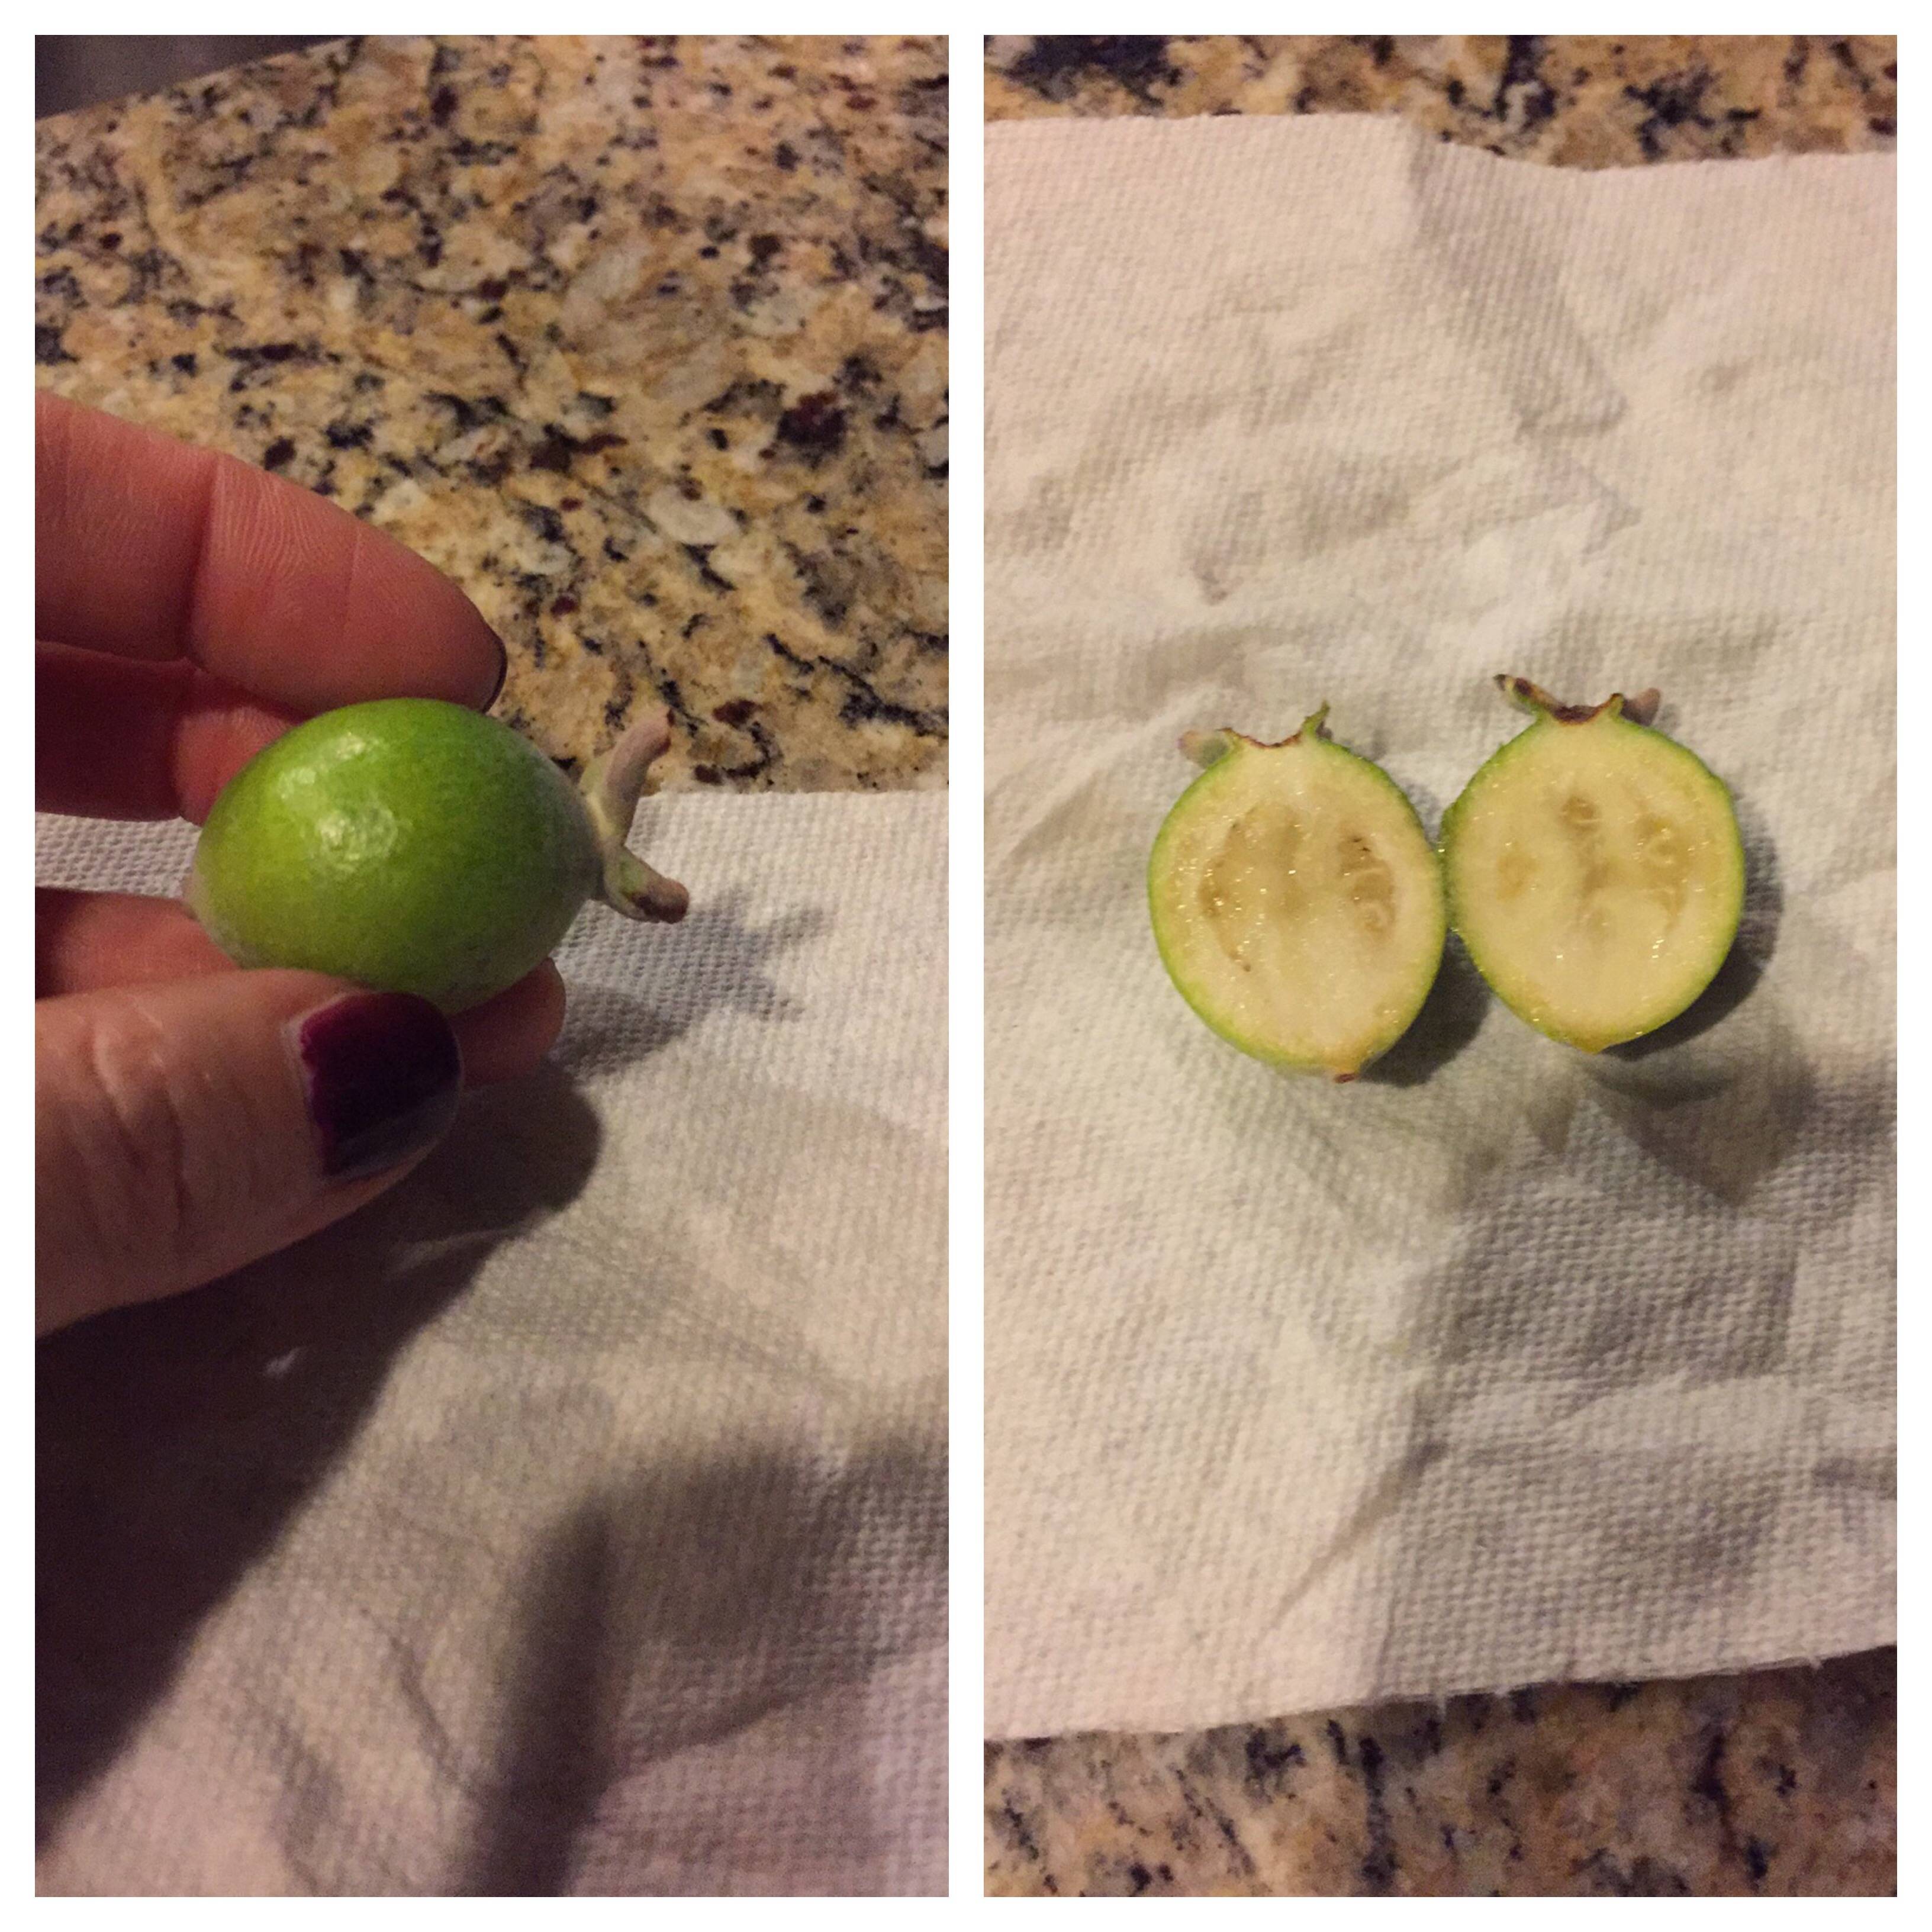 identification - What is this oval, small green fruit? - Gardening ...